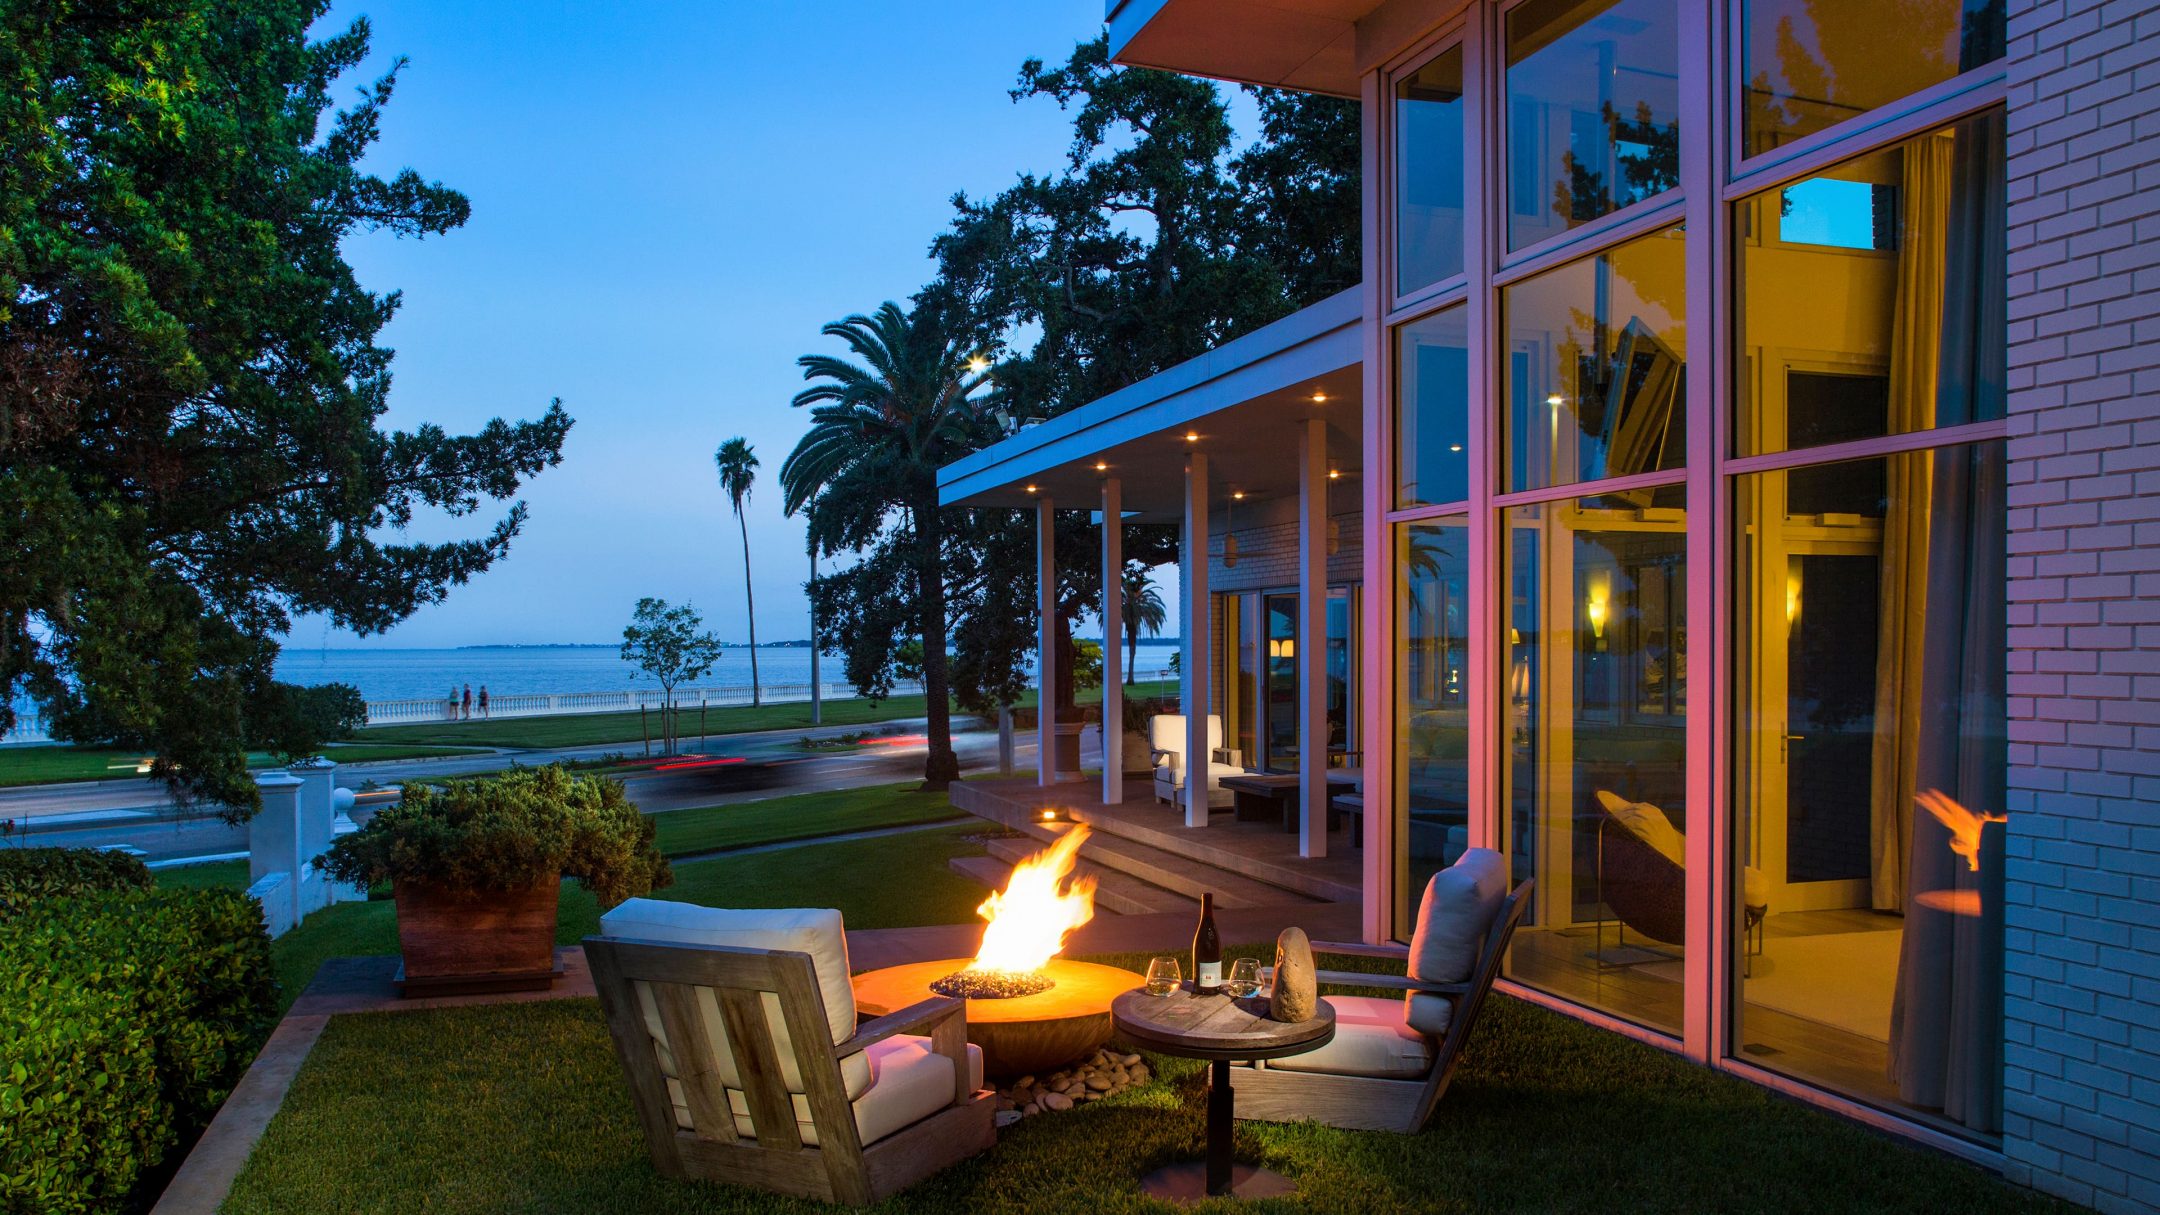 Picture of a luxury house with water view, an outdoor fireplace, and many windows.